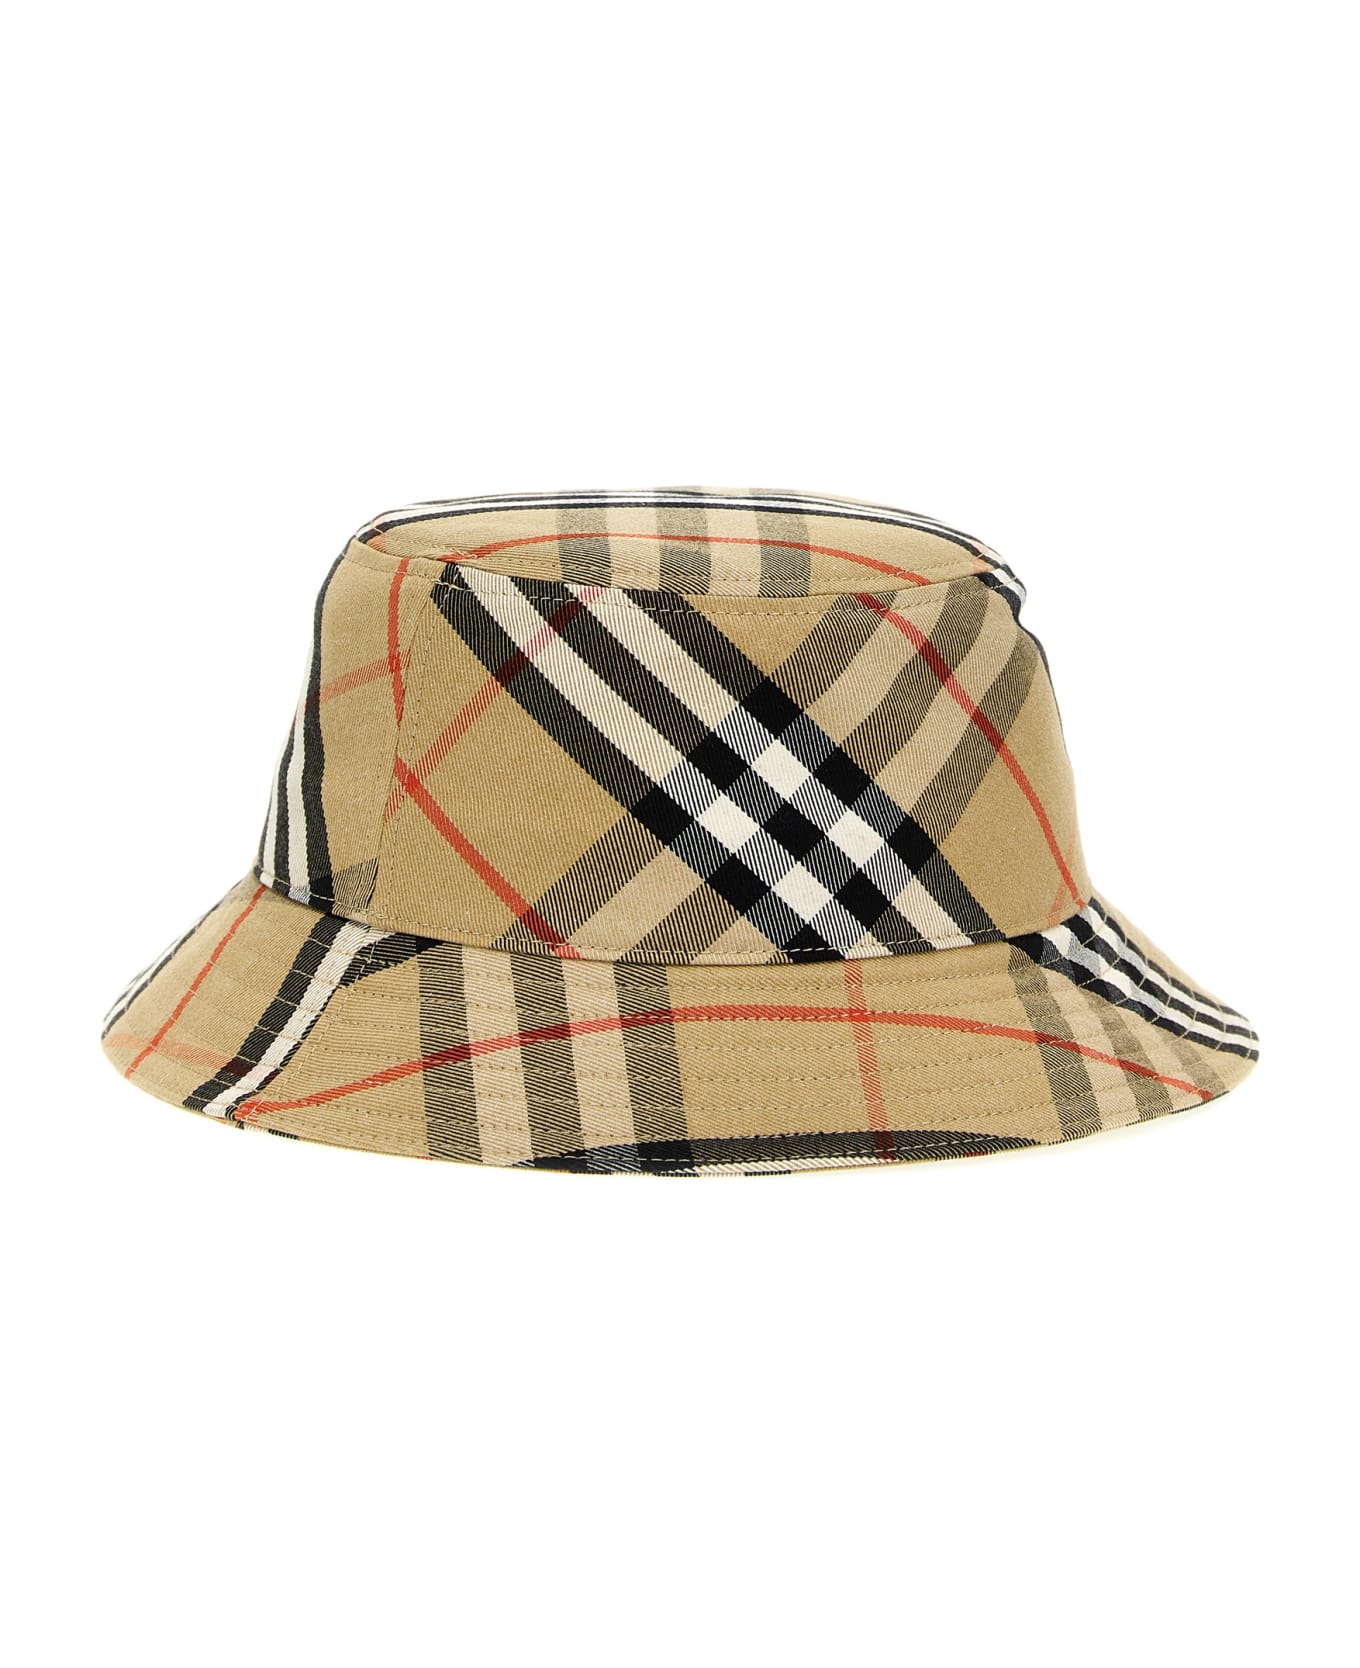 Burberry Logo Embroidery Check Bucket Hat - Beige 帽子